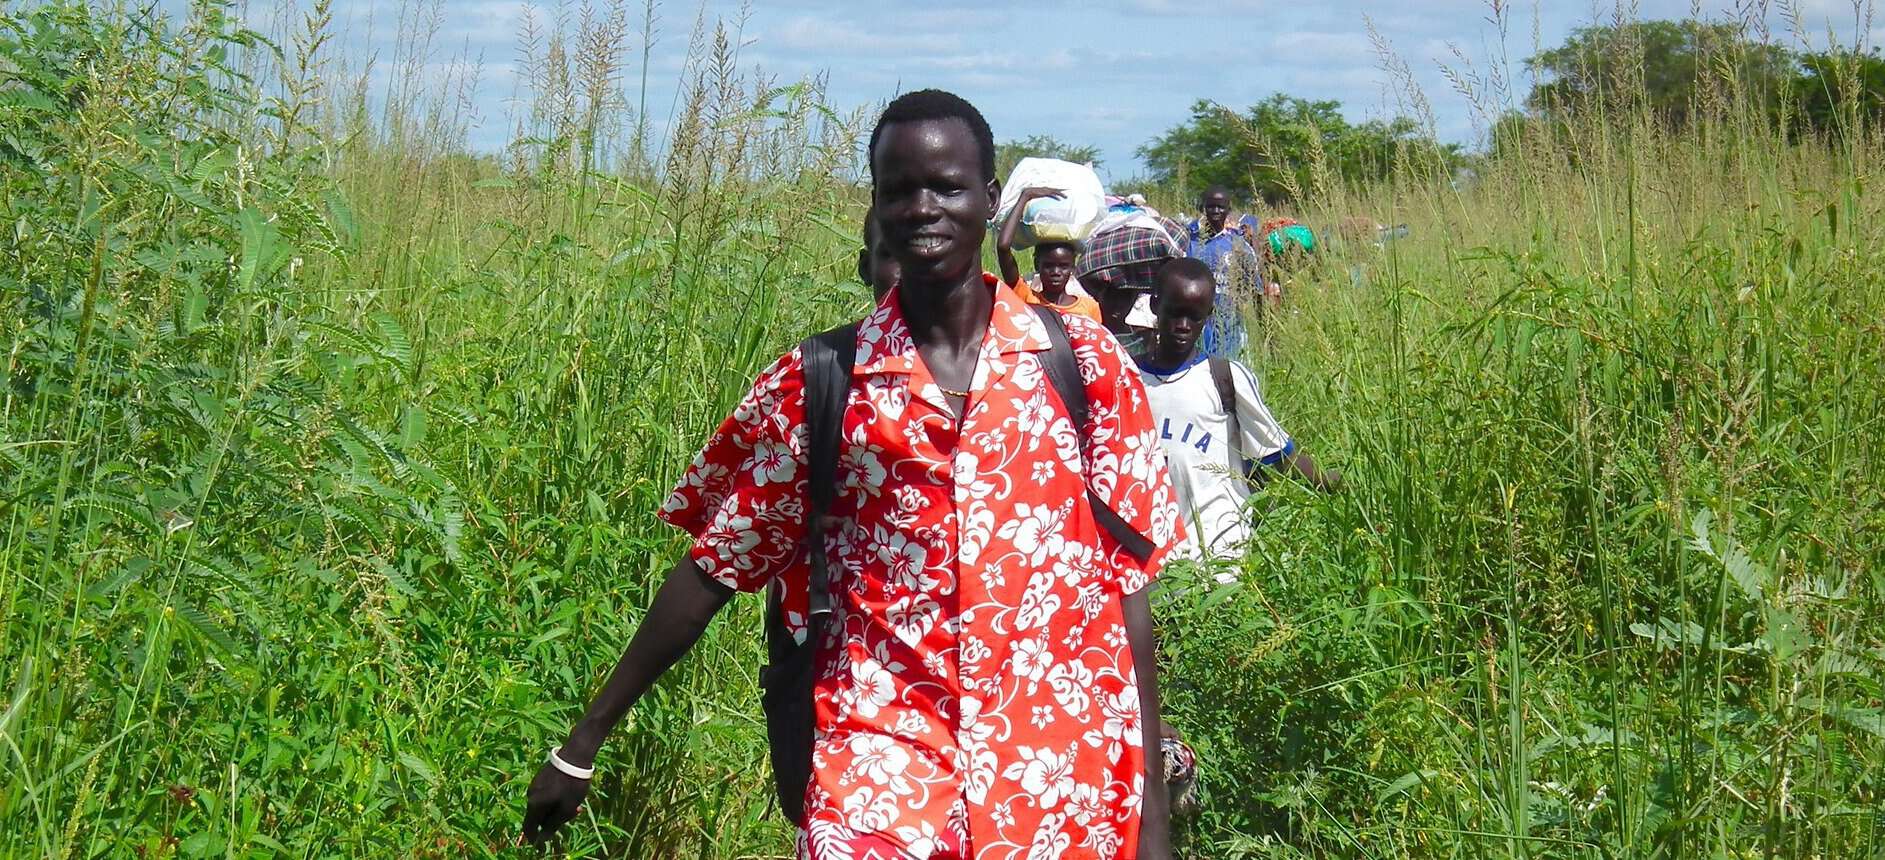 A line of Sudanese people are shown walking toward the camera.